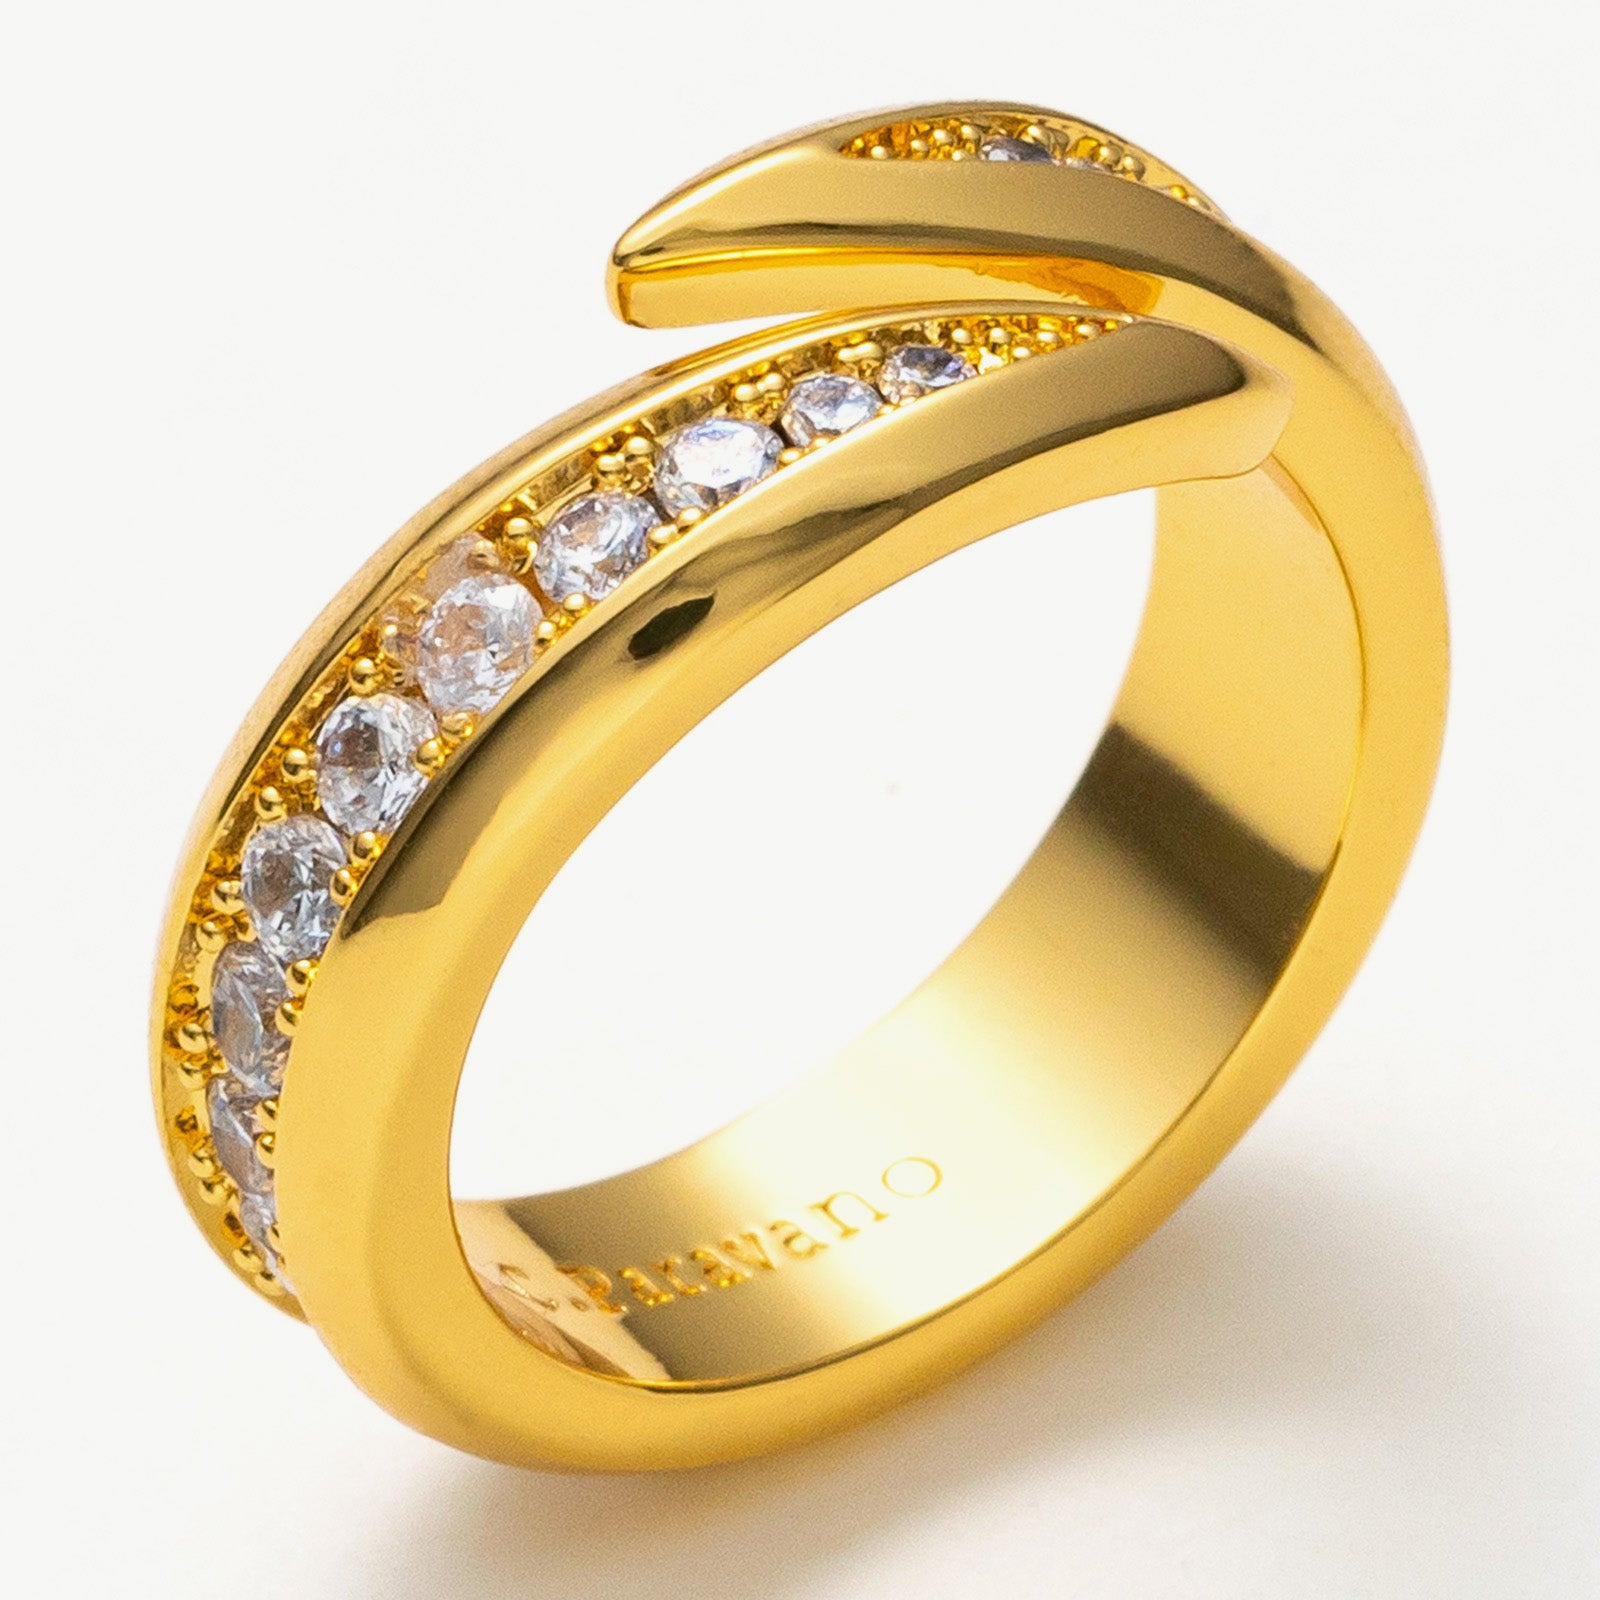 Crystal Crossover Ring in Gold, a glamorous and versatile piece that effortlessly elevates your style